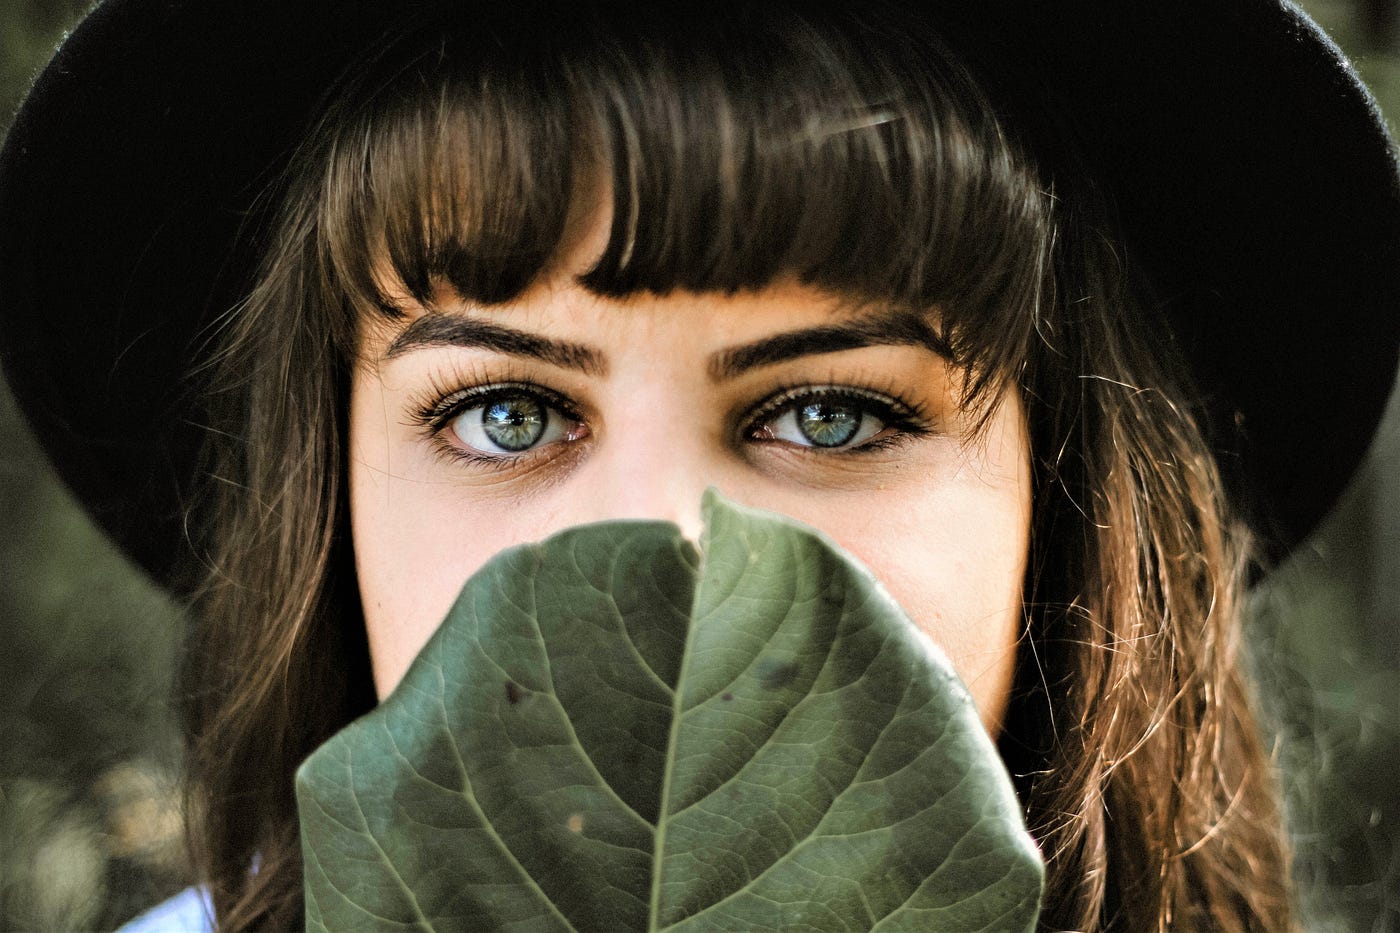 girl with brown hair and green eyes wearing dark hat holding leaf in front of her face